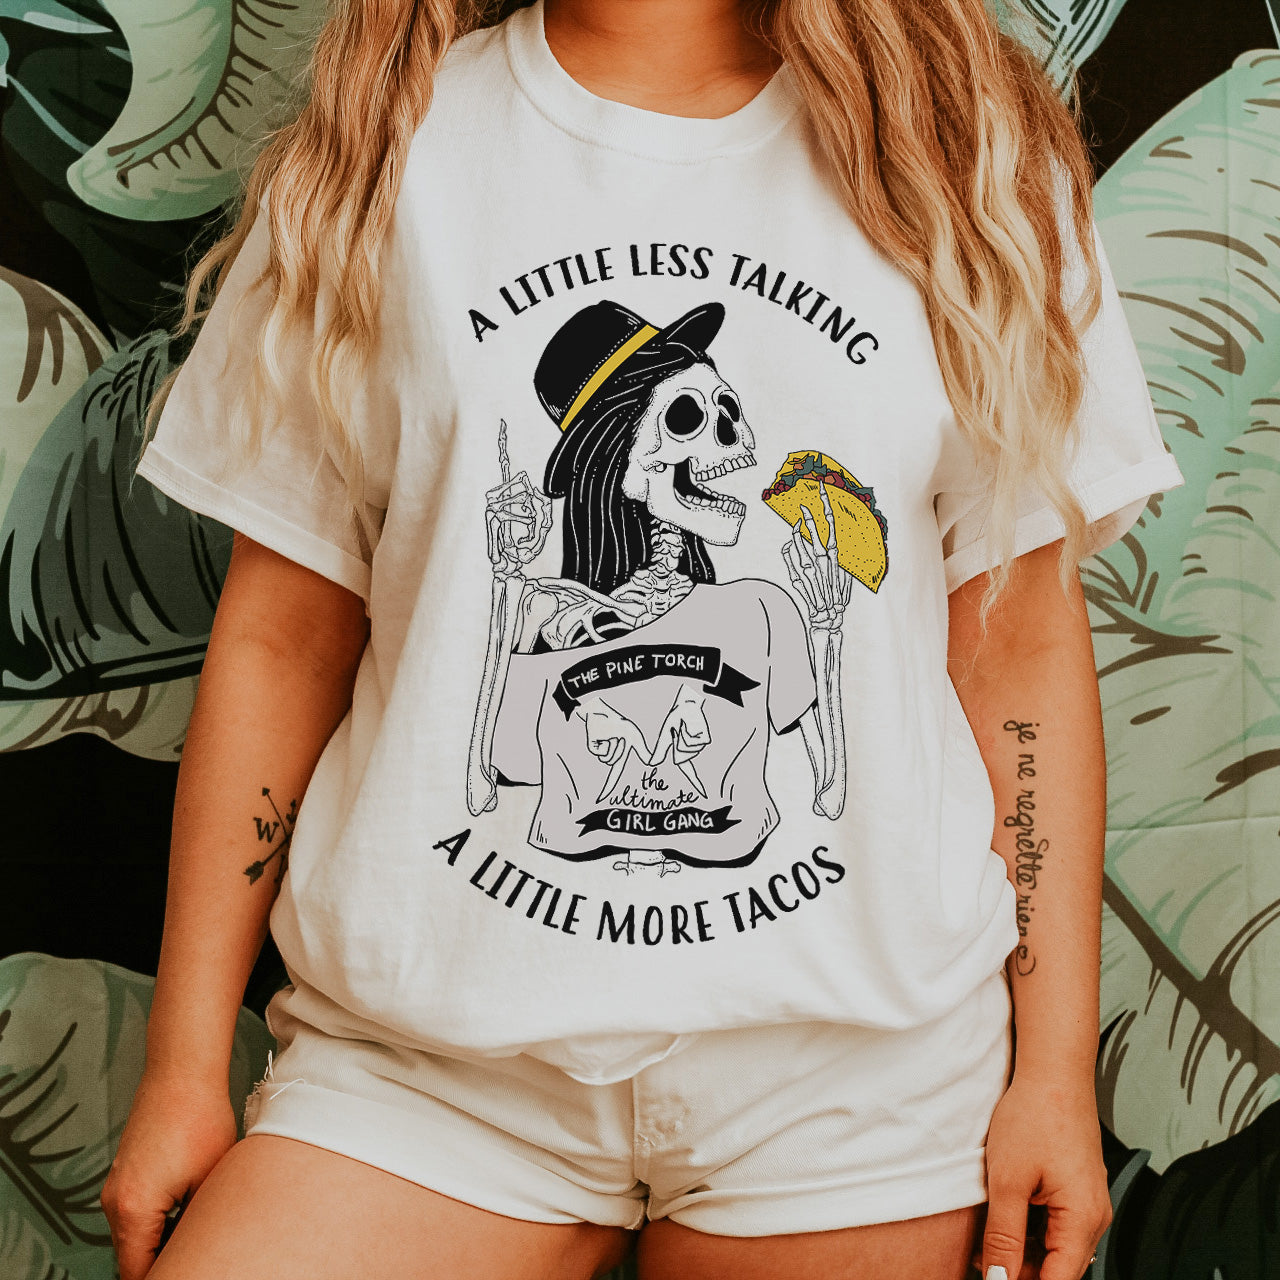 « A LITTLE LESS TALKING A LITTLE MORE TACOS » SLOUCHY OR UNISEX TEE